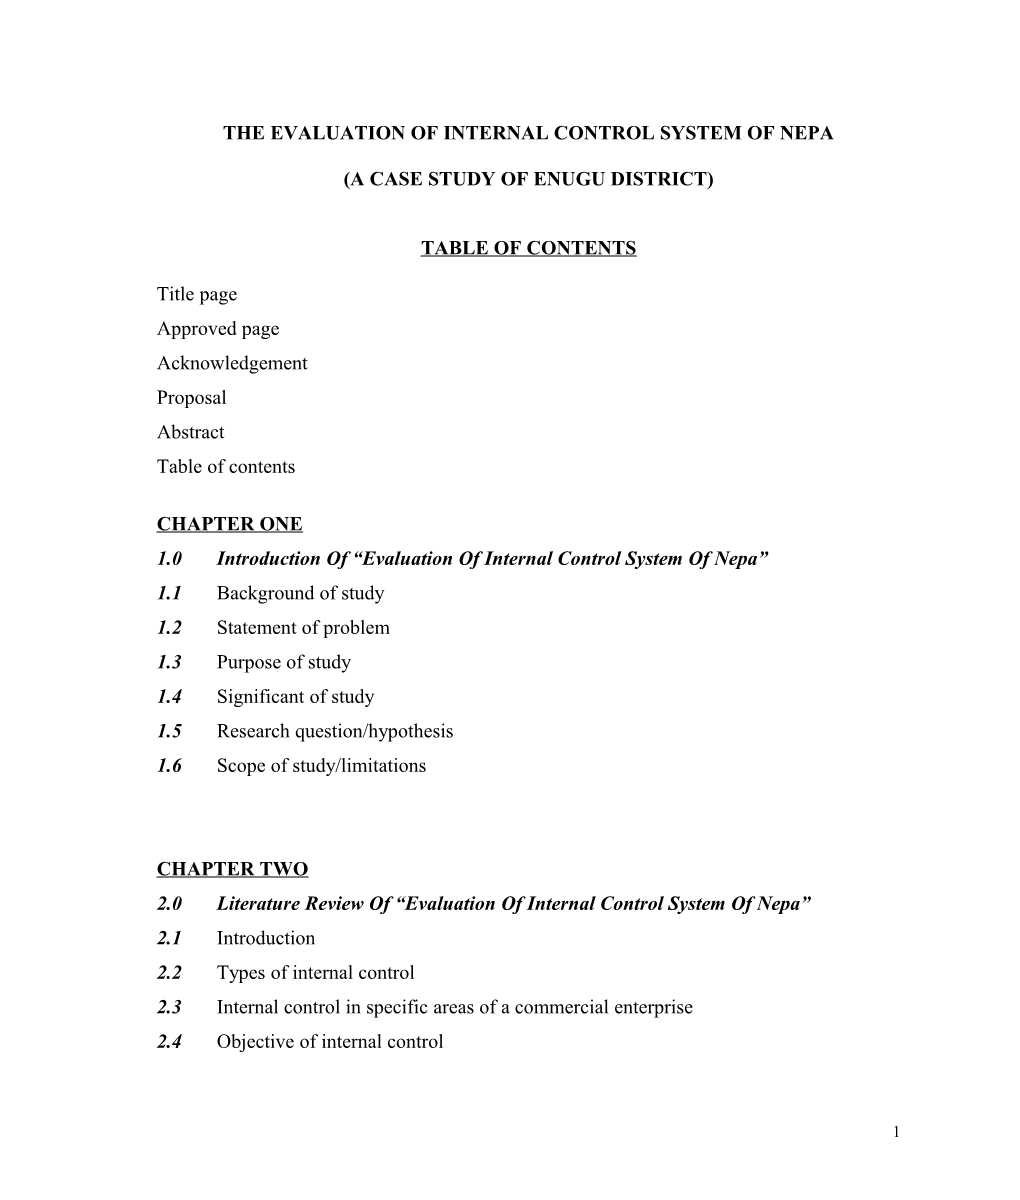 The Evaluation of Internal Control System of Nepa